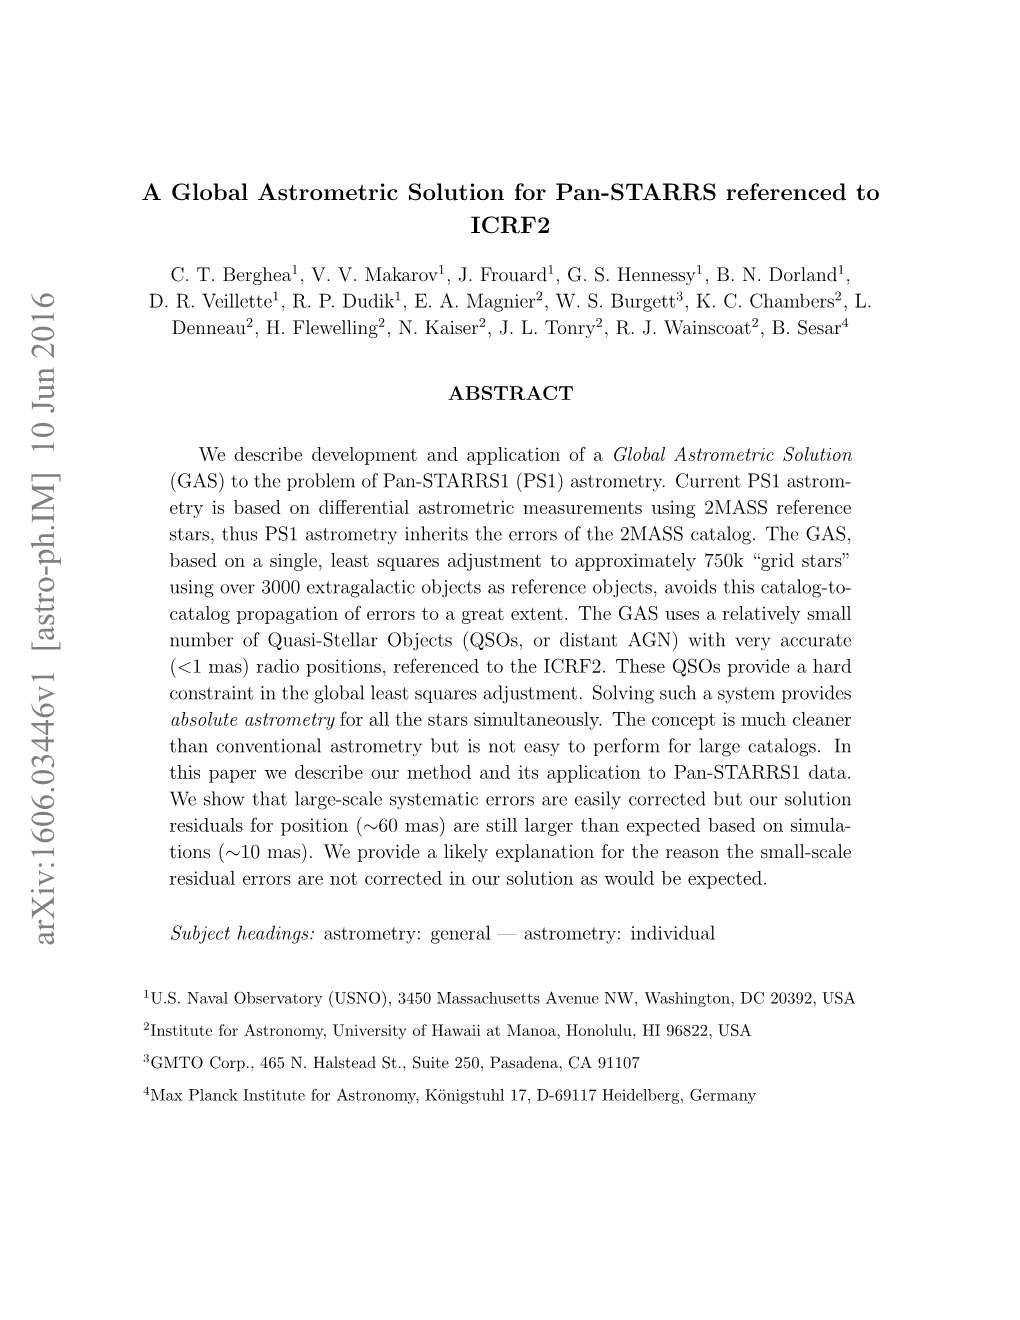 A Global Astrometric Solution for Pan-STARRS Referenced to ICRF2